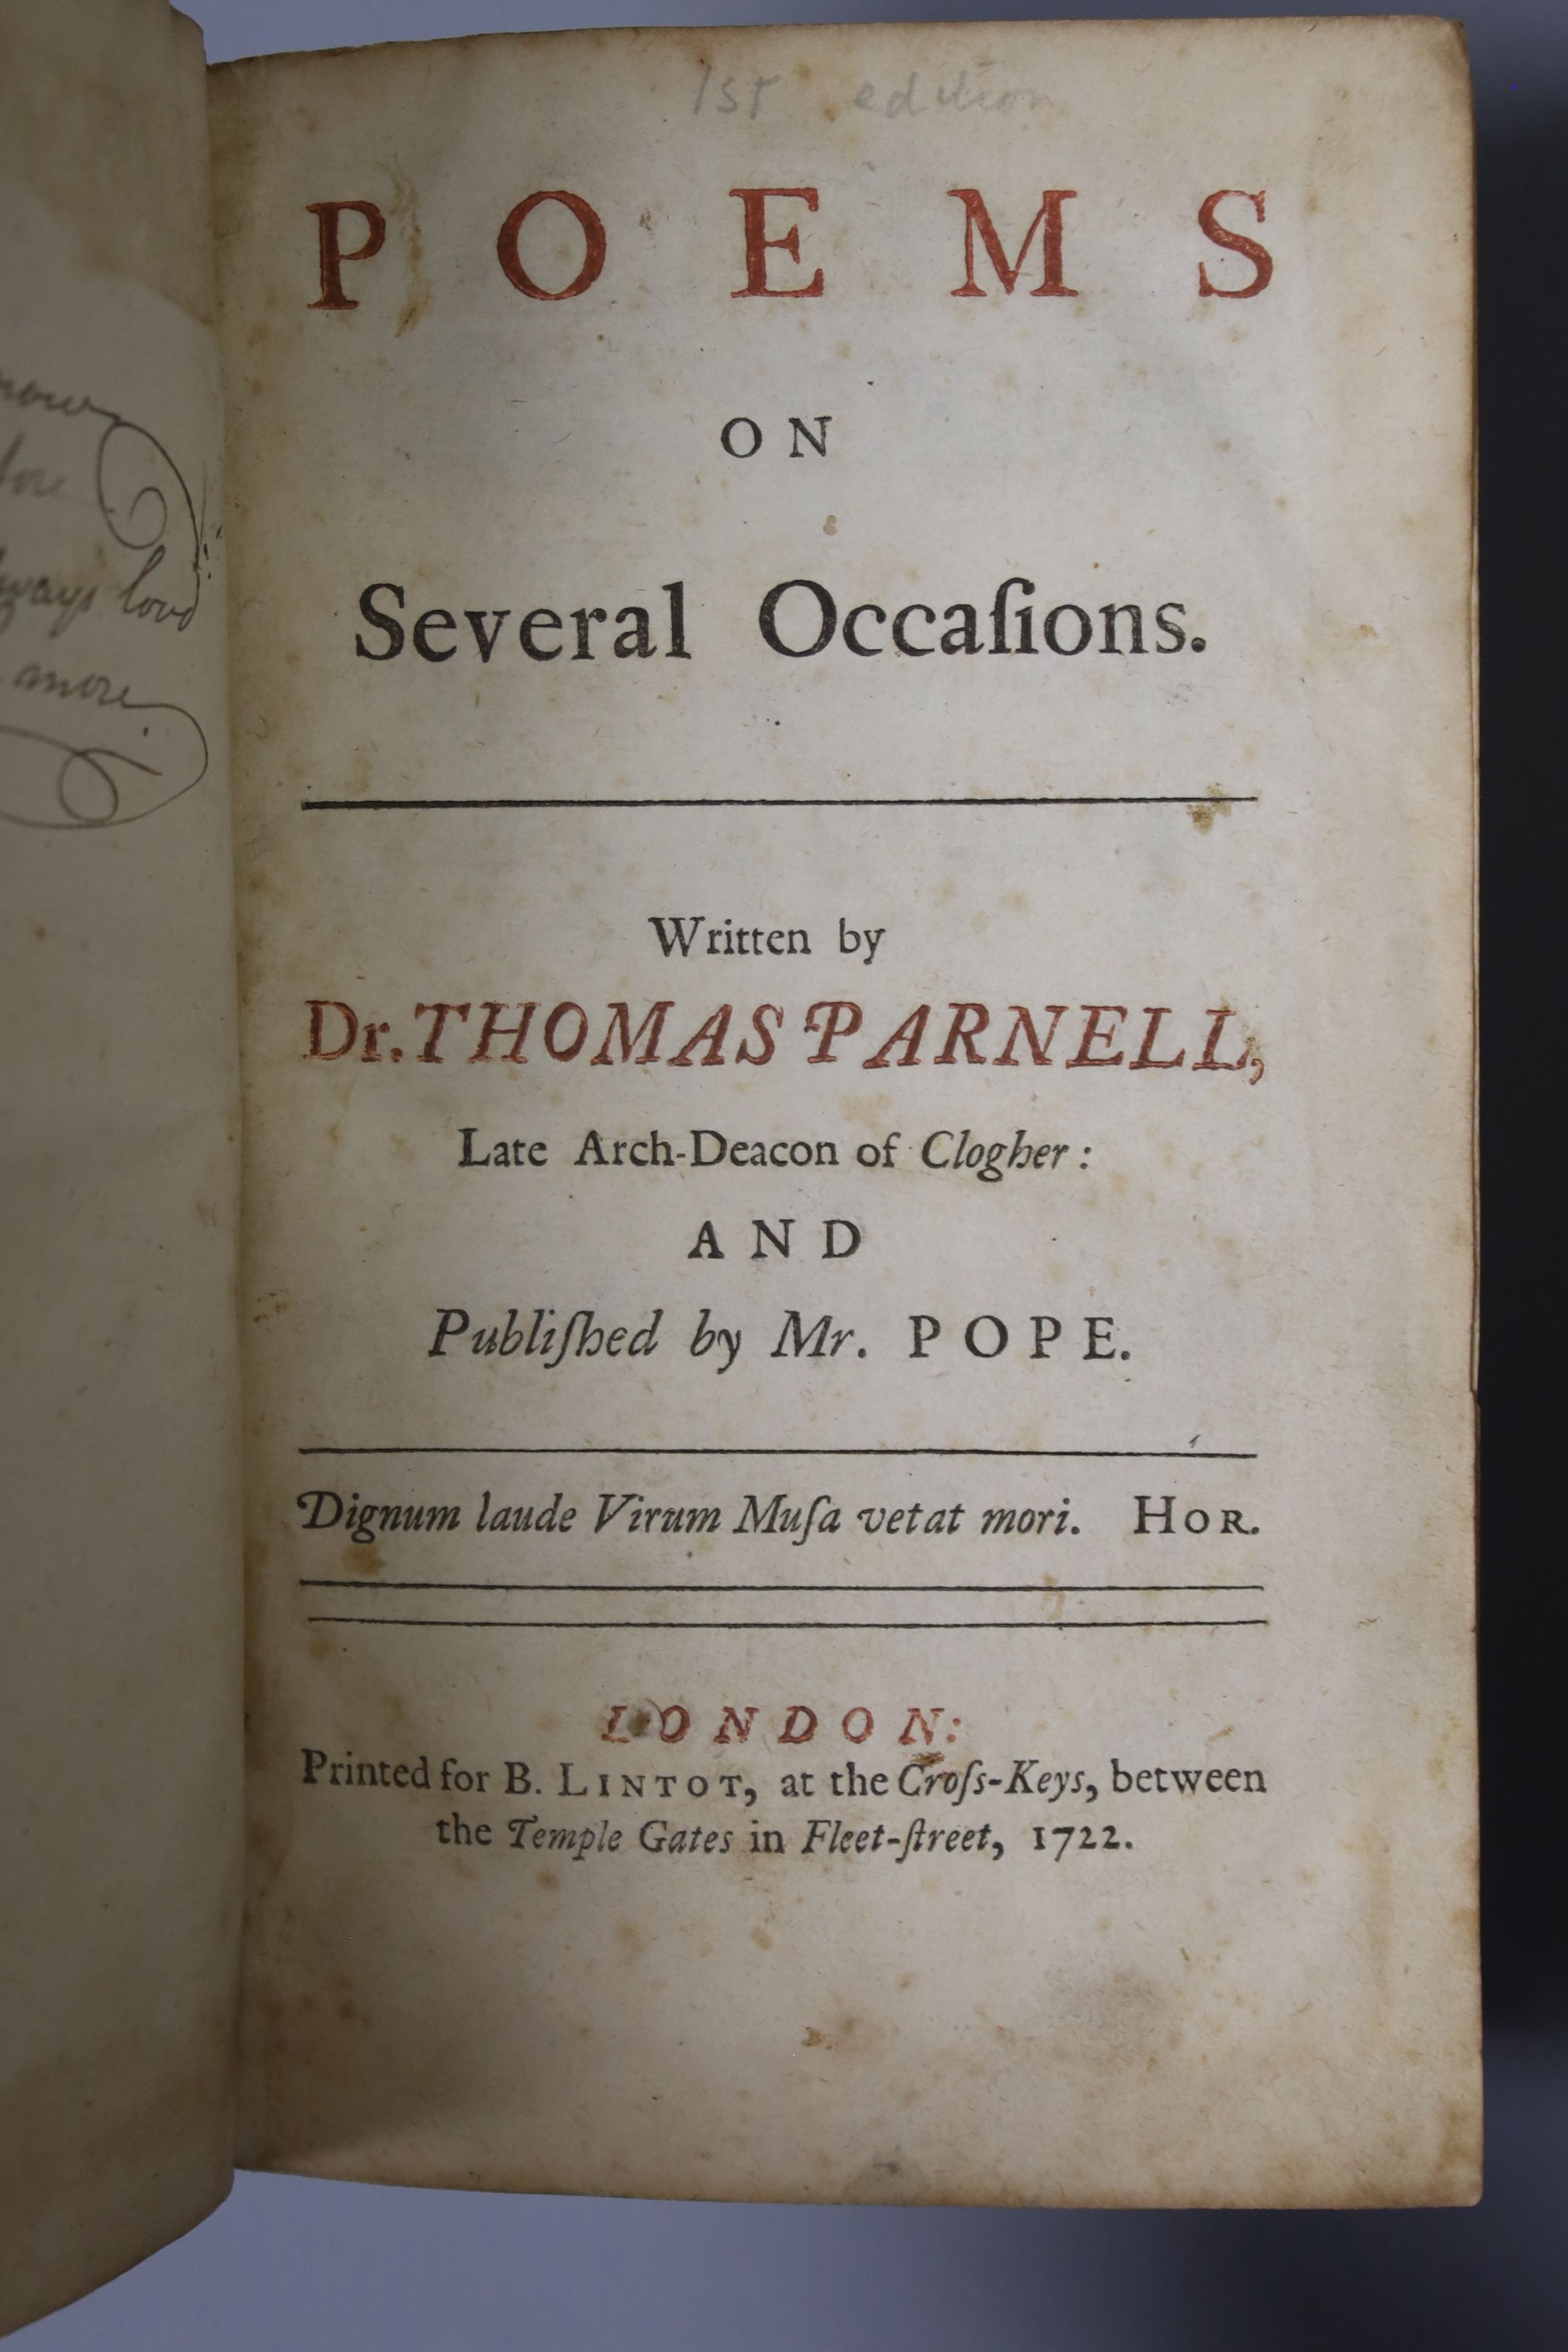 Parnell, Thomas - Poems on Several Occasions, 1st edition, 8vo, contemporary calf, rebacked and labelled, bookplate of the